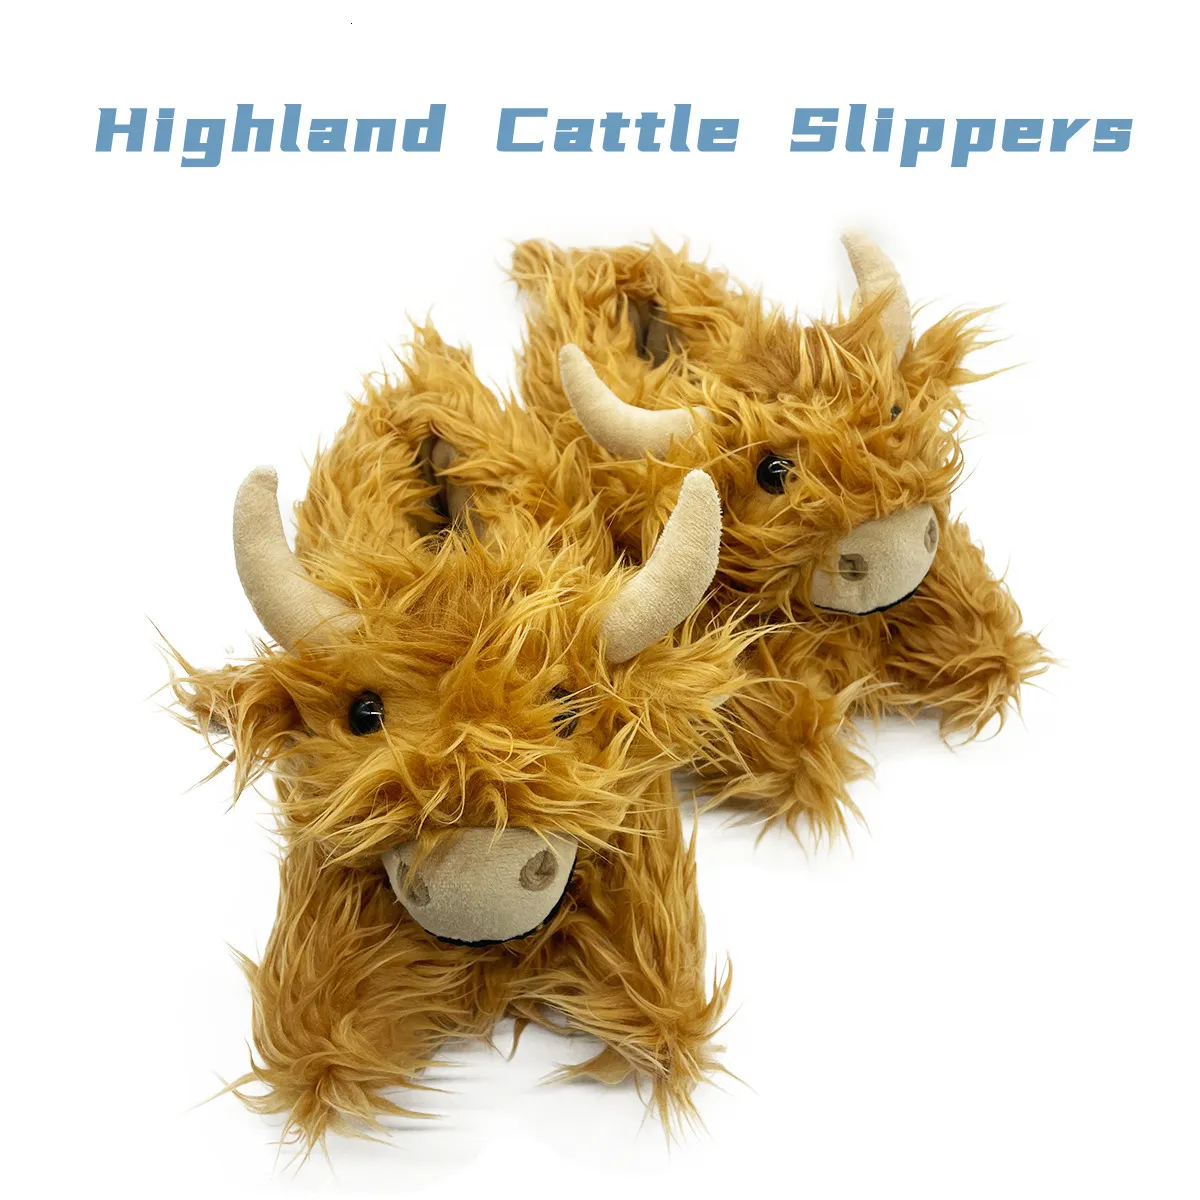 Movies TV Plush Toy Highland Cow Slippers Pluche Schotse vee slippers Bruin Winter Winter Warm Home Slipper Kawaii Animal Shoes Adult Plushie Gift 230821